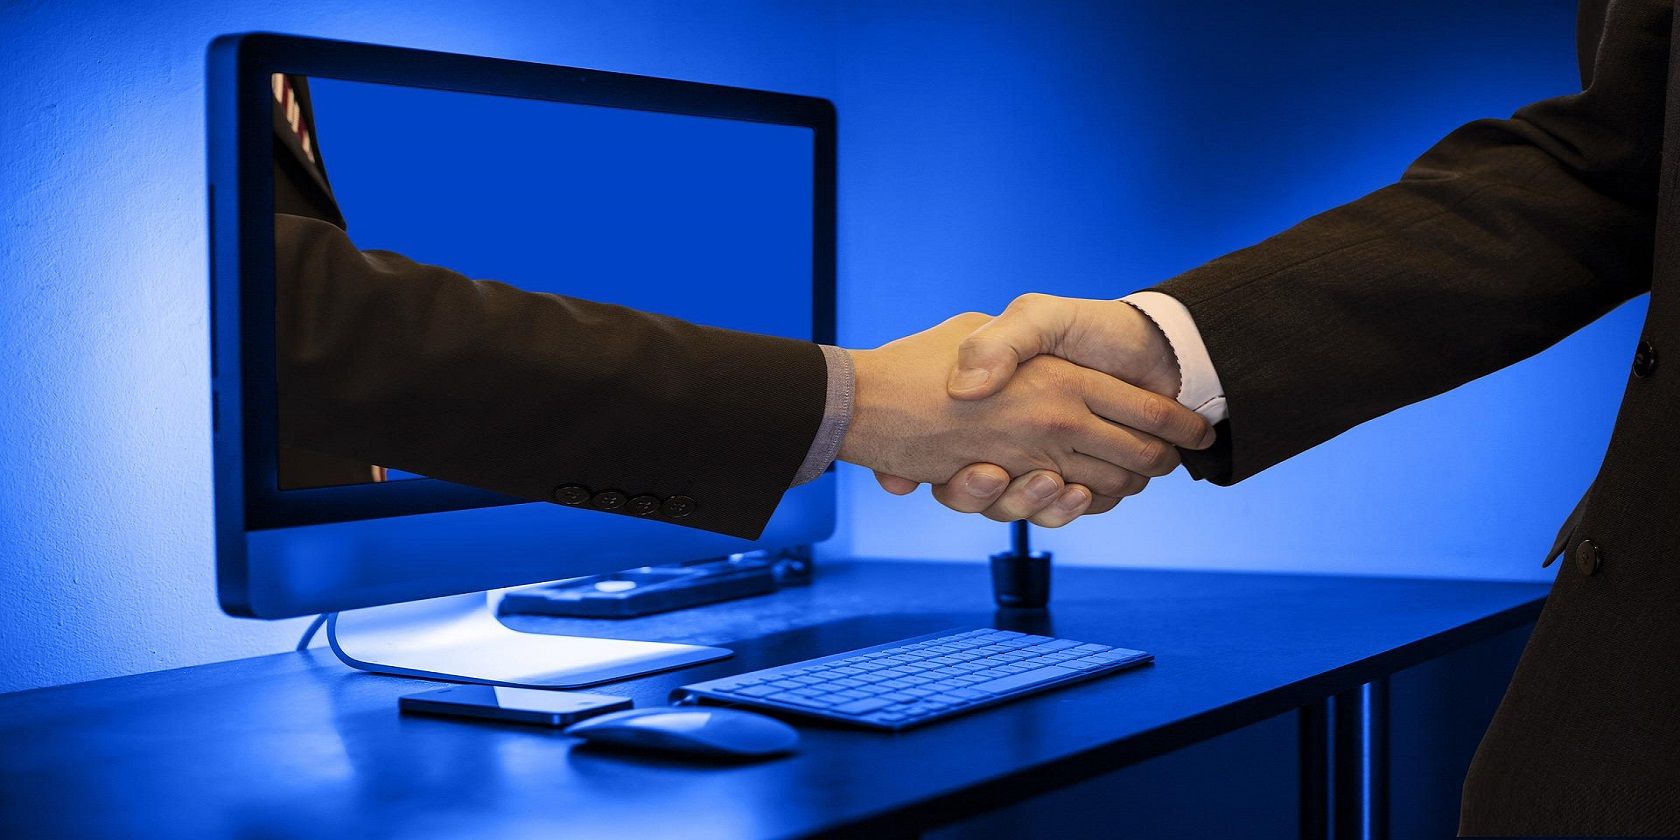 Hand reaching out of the computer to shake the hand of the person in front of it.